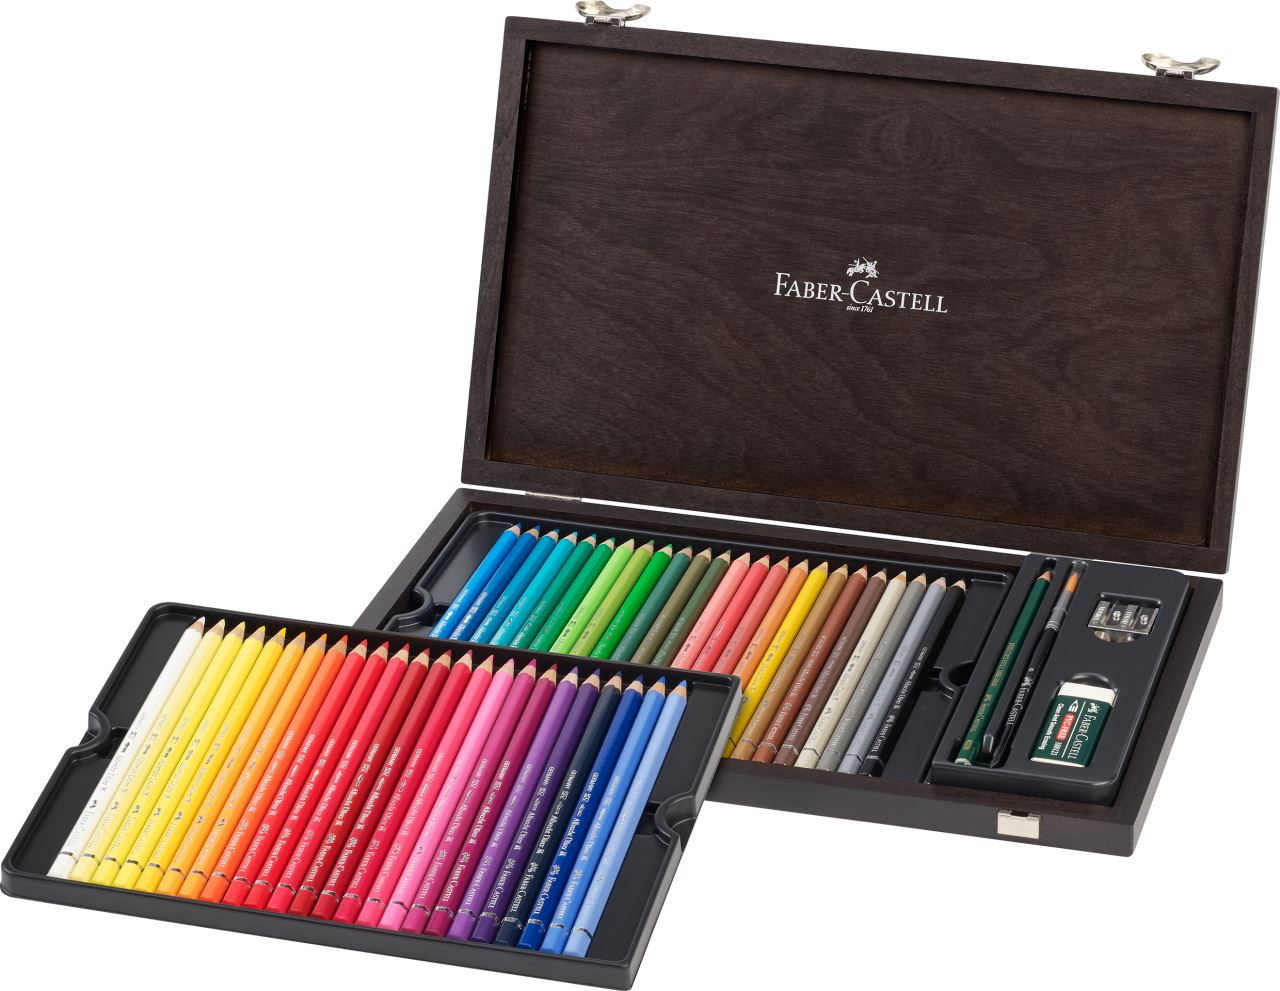 Faber-Castell 48 Watercolour Pencils with Accessories 